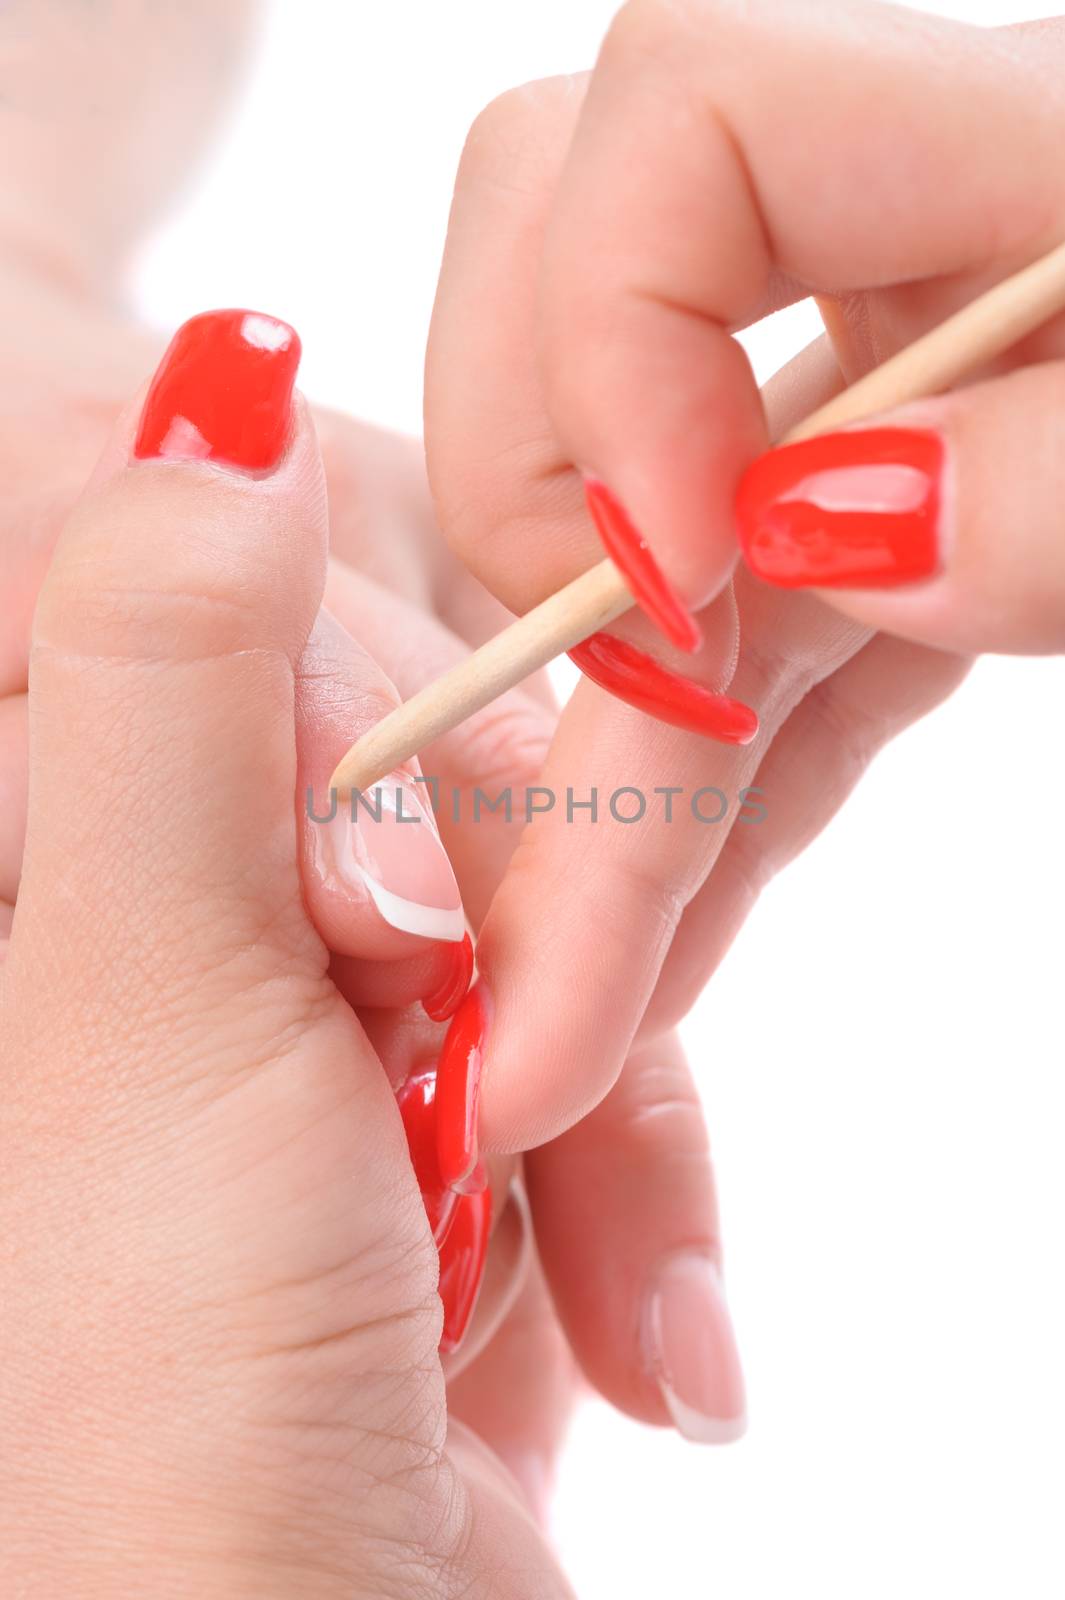 manicure applying - cleaning the cuticles  by starush